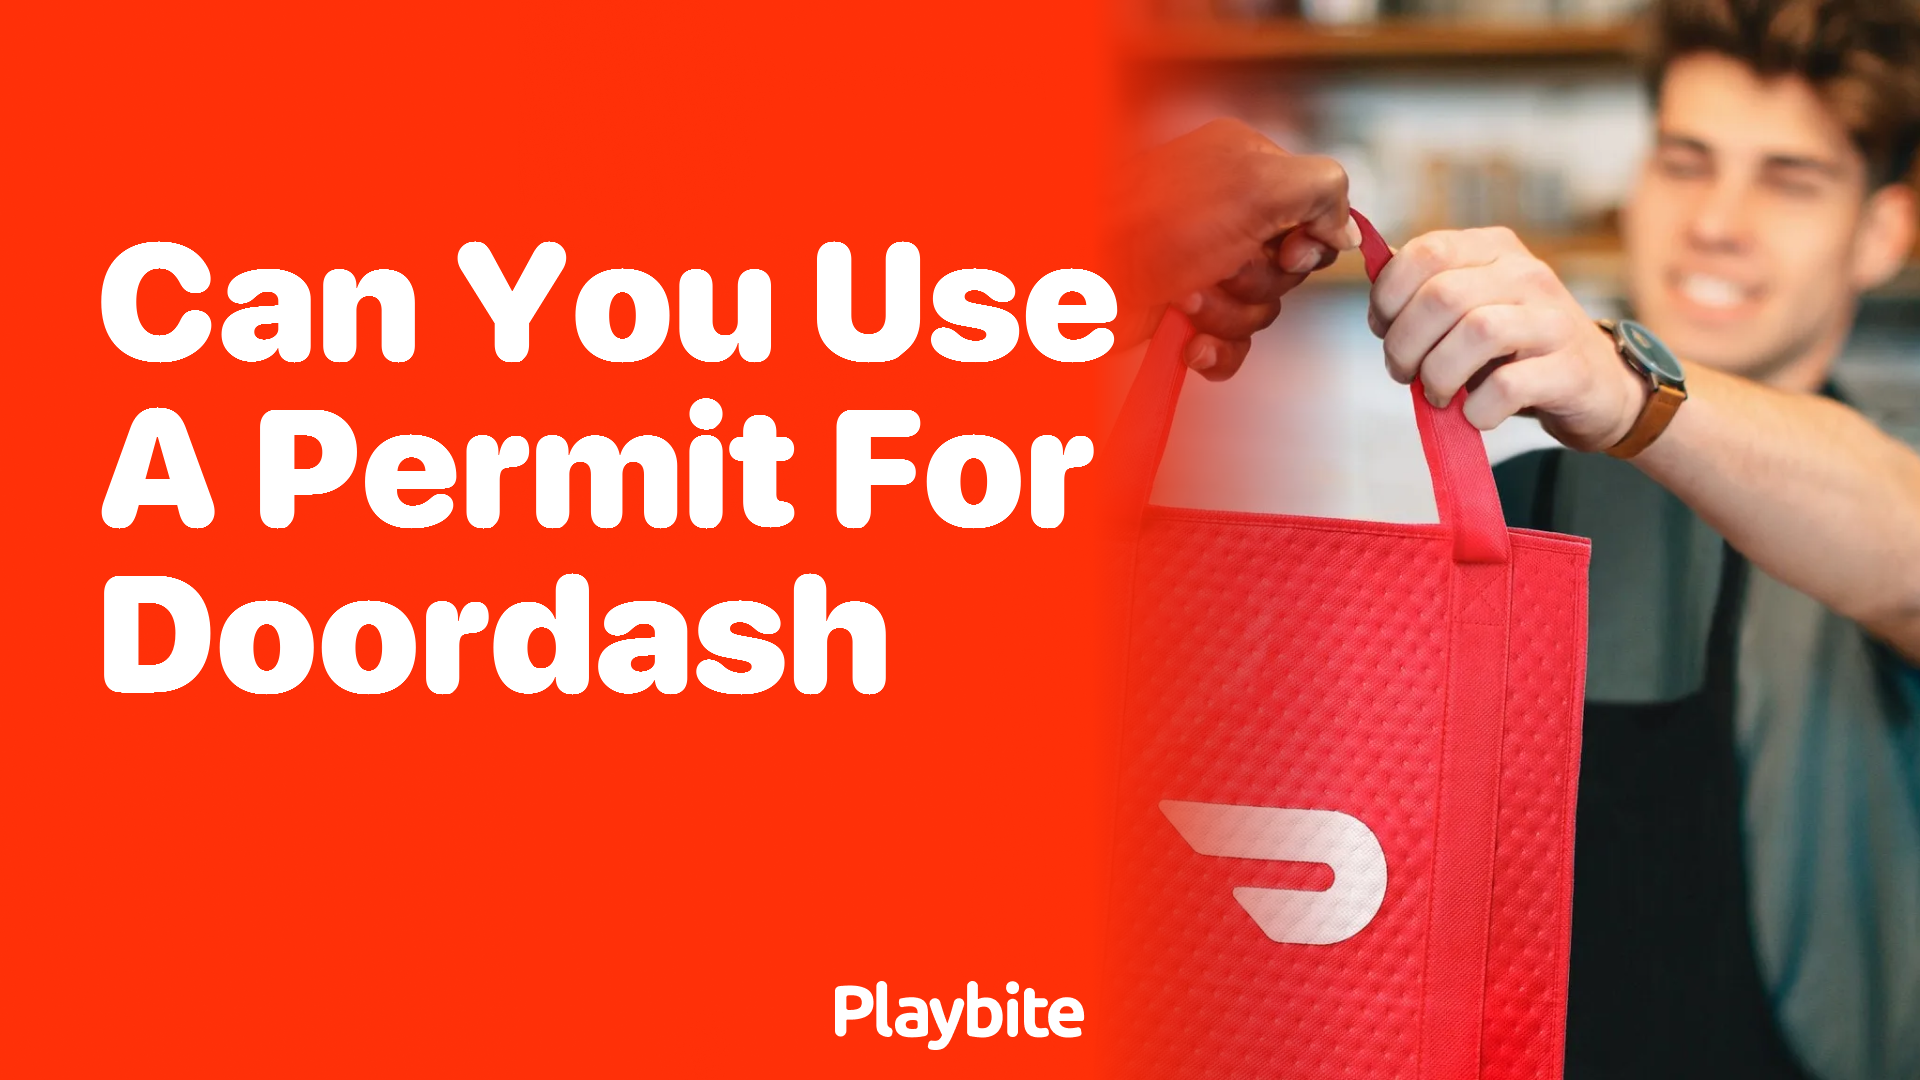 Can You Use a Permit for DoorDash?